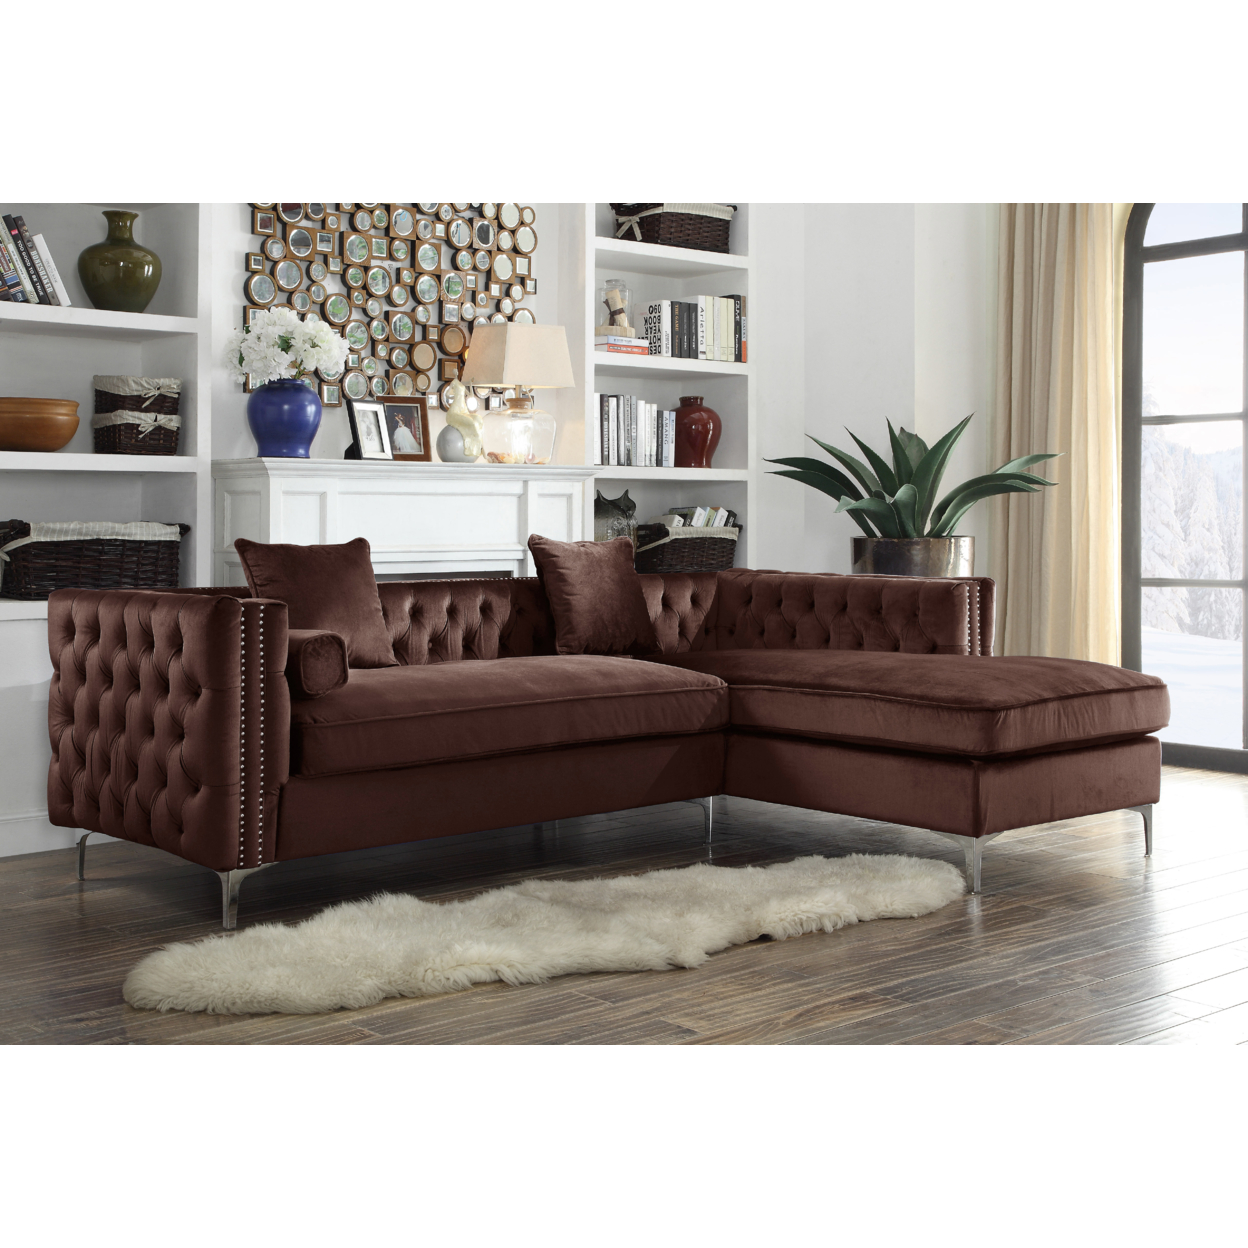 Picasso Velvet Right Facing Sectional Sofa Button Tufted With Silver Nailhead Trim Silvertone Metal Y-leg - Brown